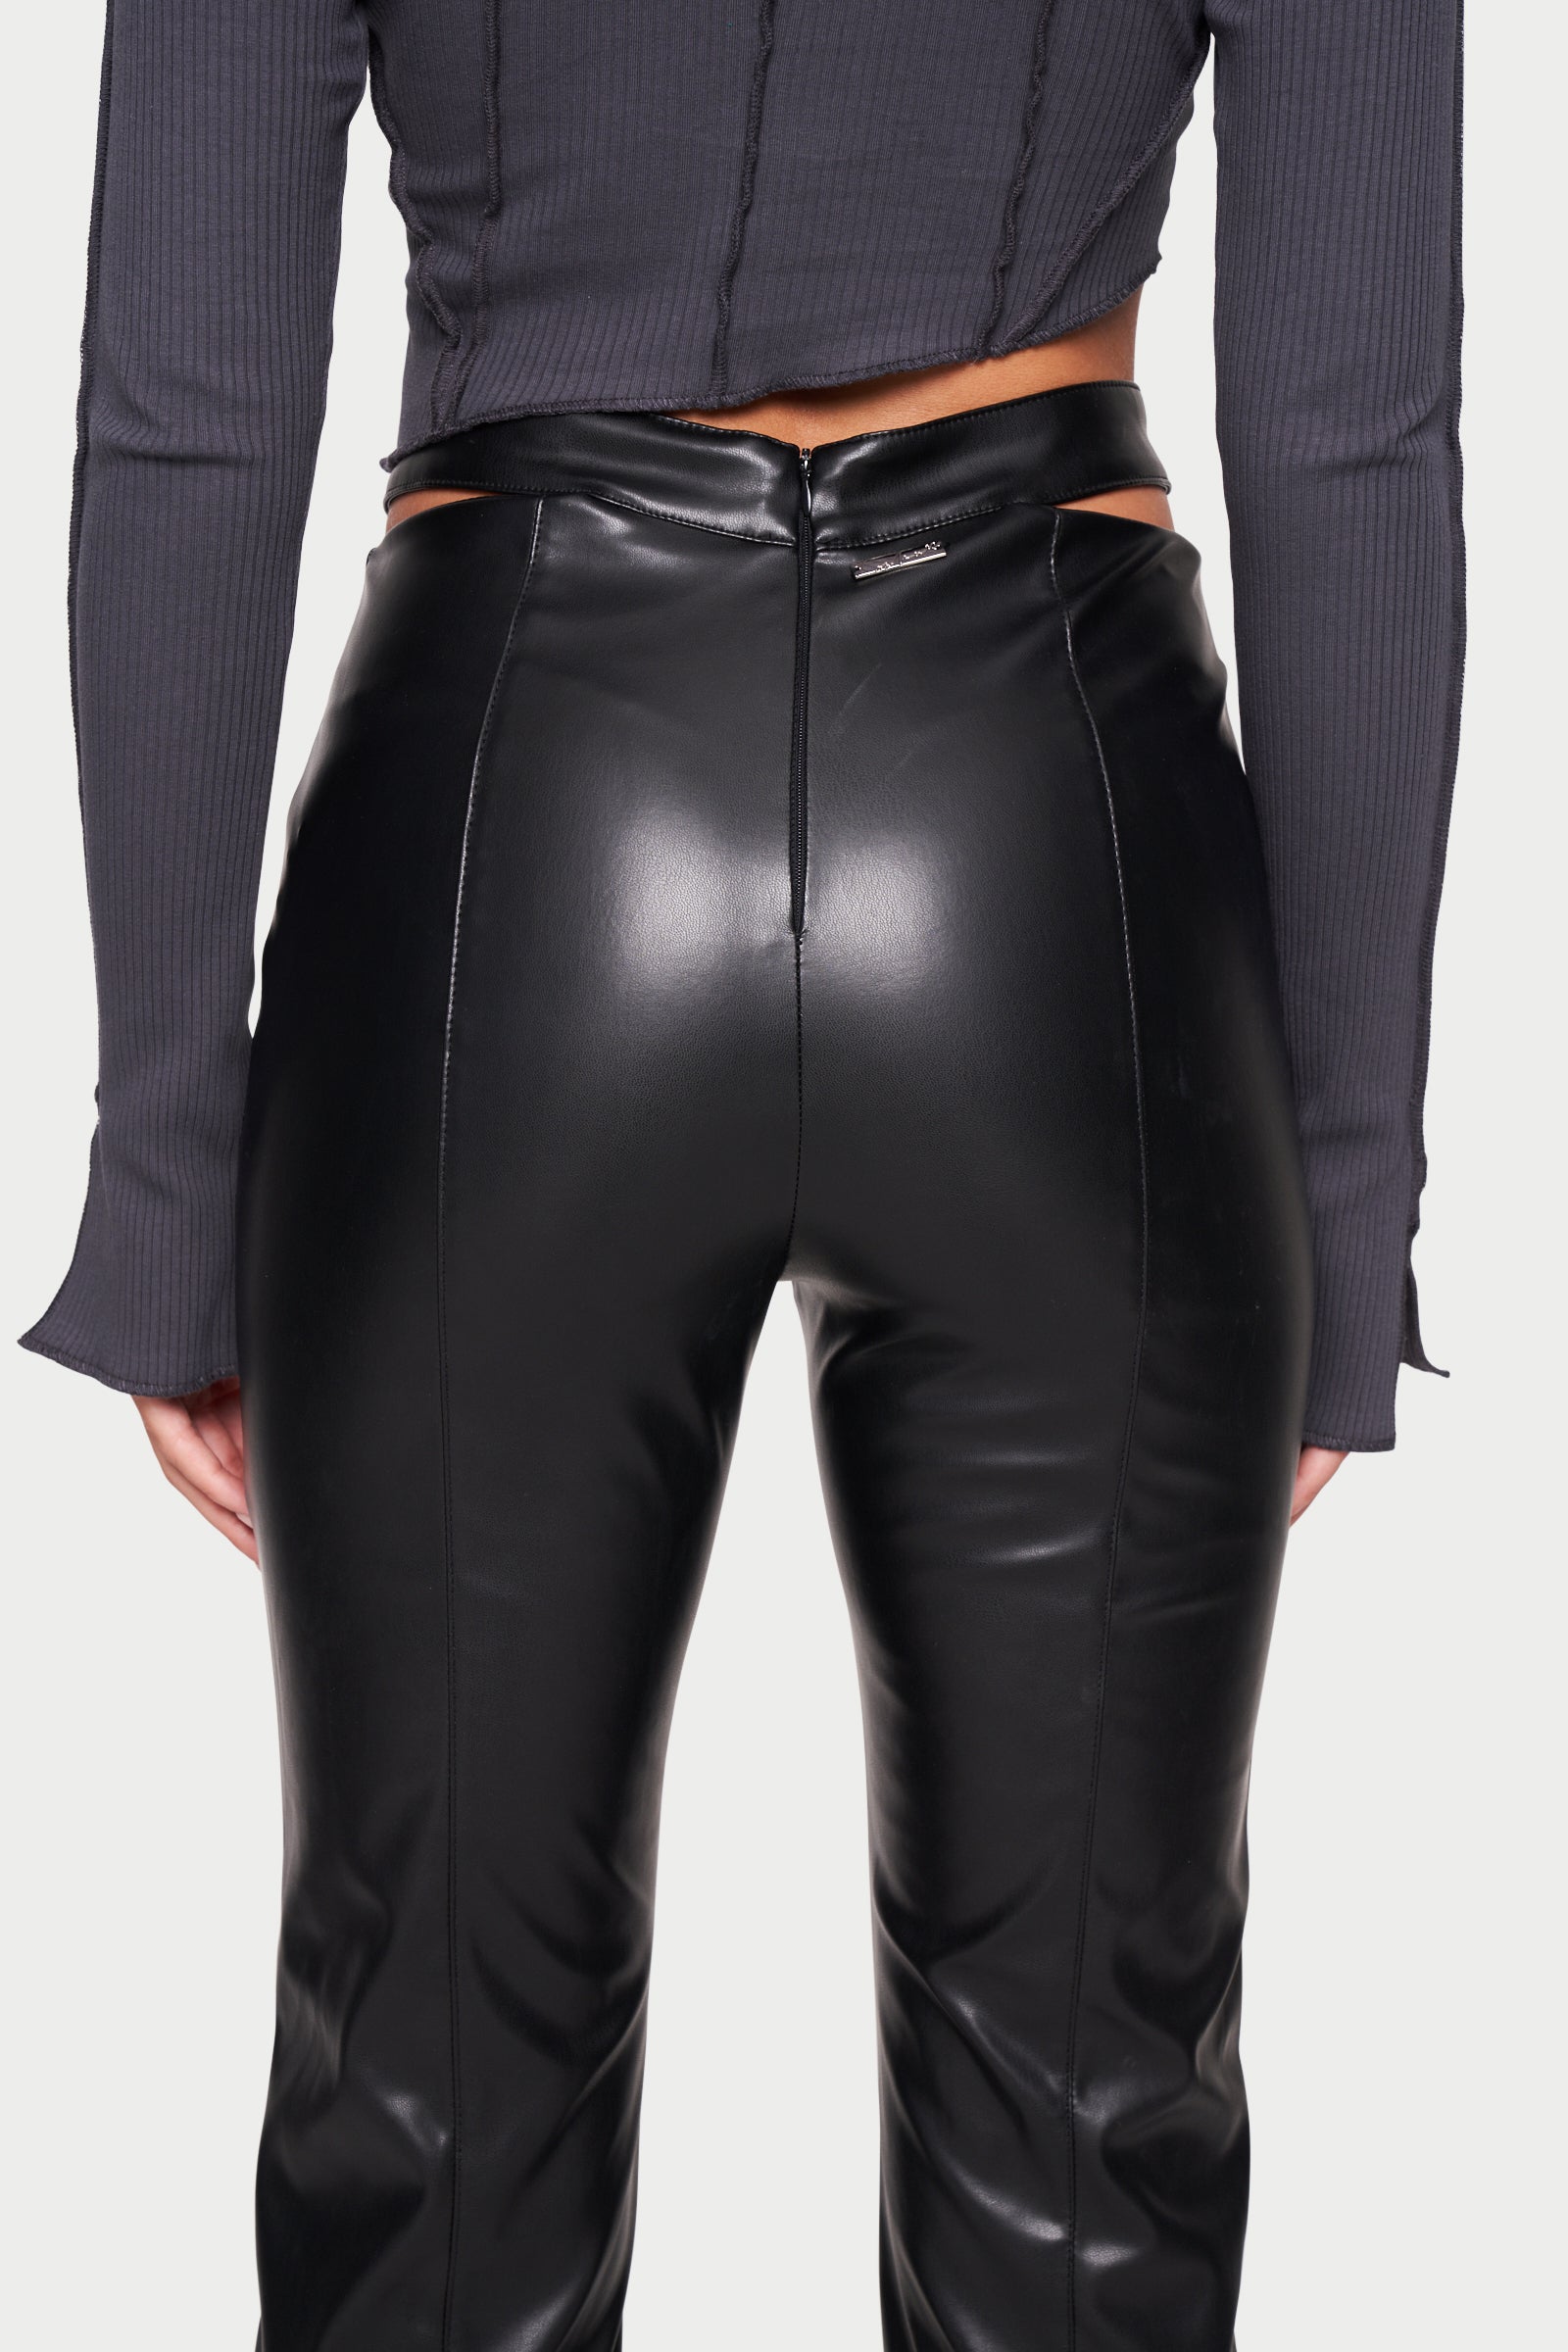 Buy Womens Leather Pants Online In India  Etsy India